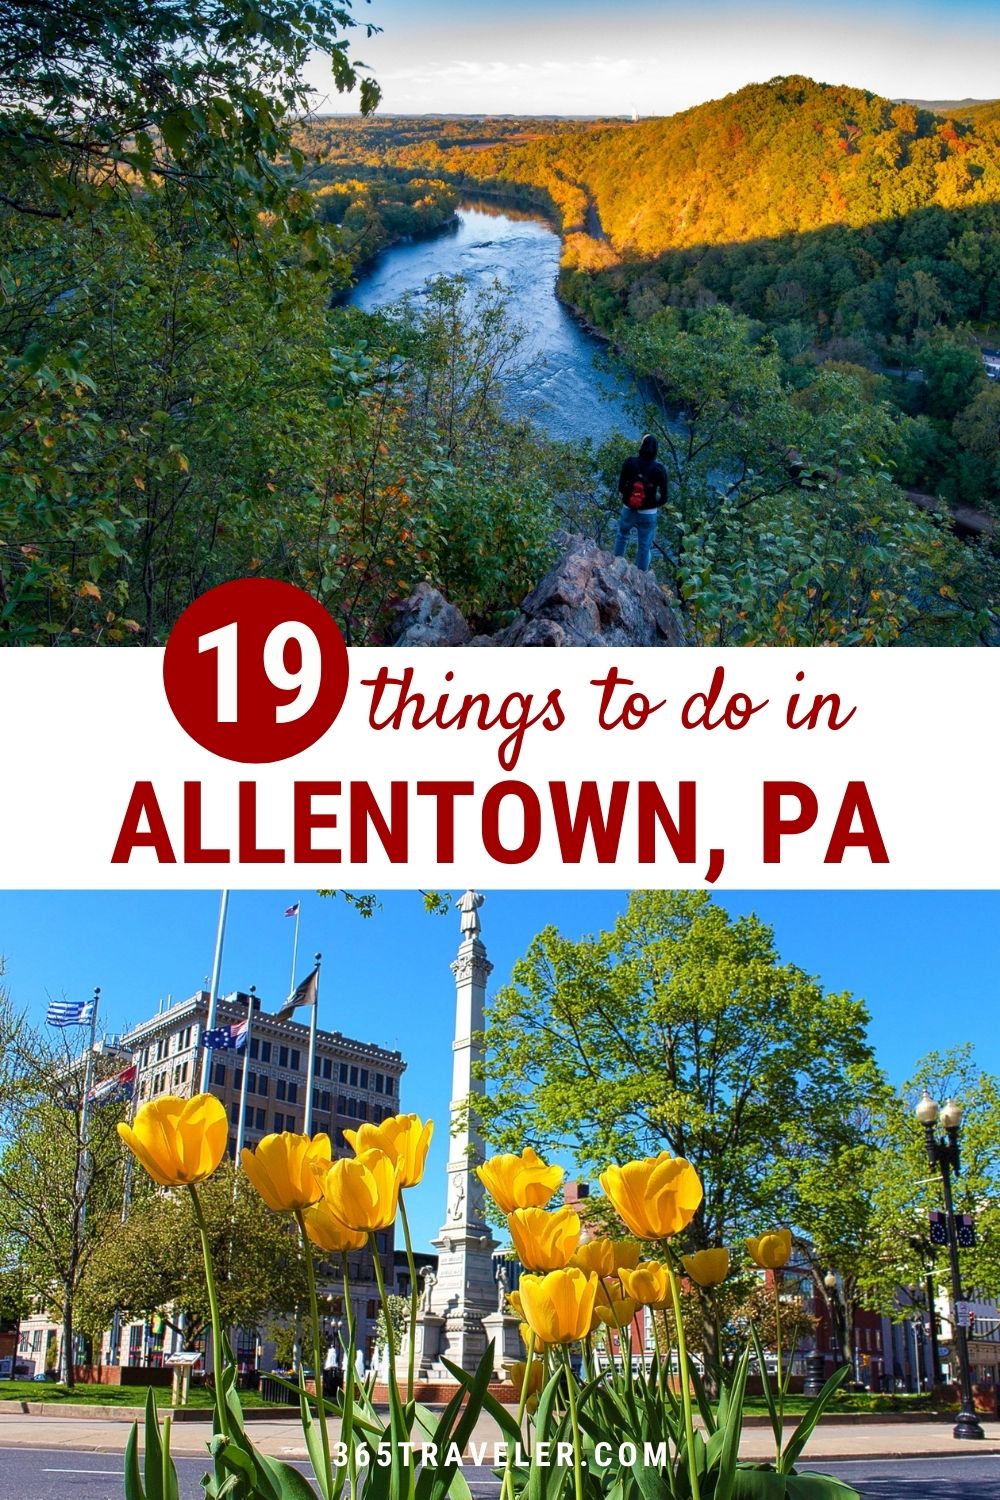 19 FUN THINGS TO DO IN ALLENTOWN PA (& LEHIGH VALLEY)